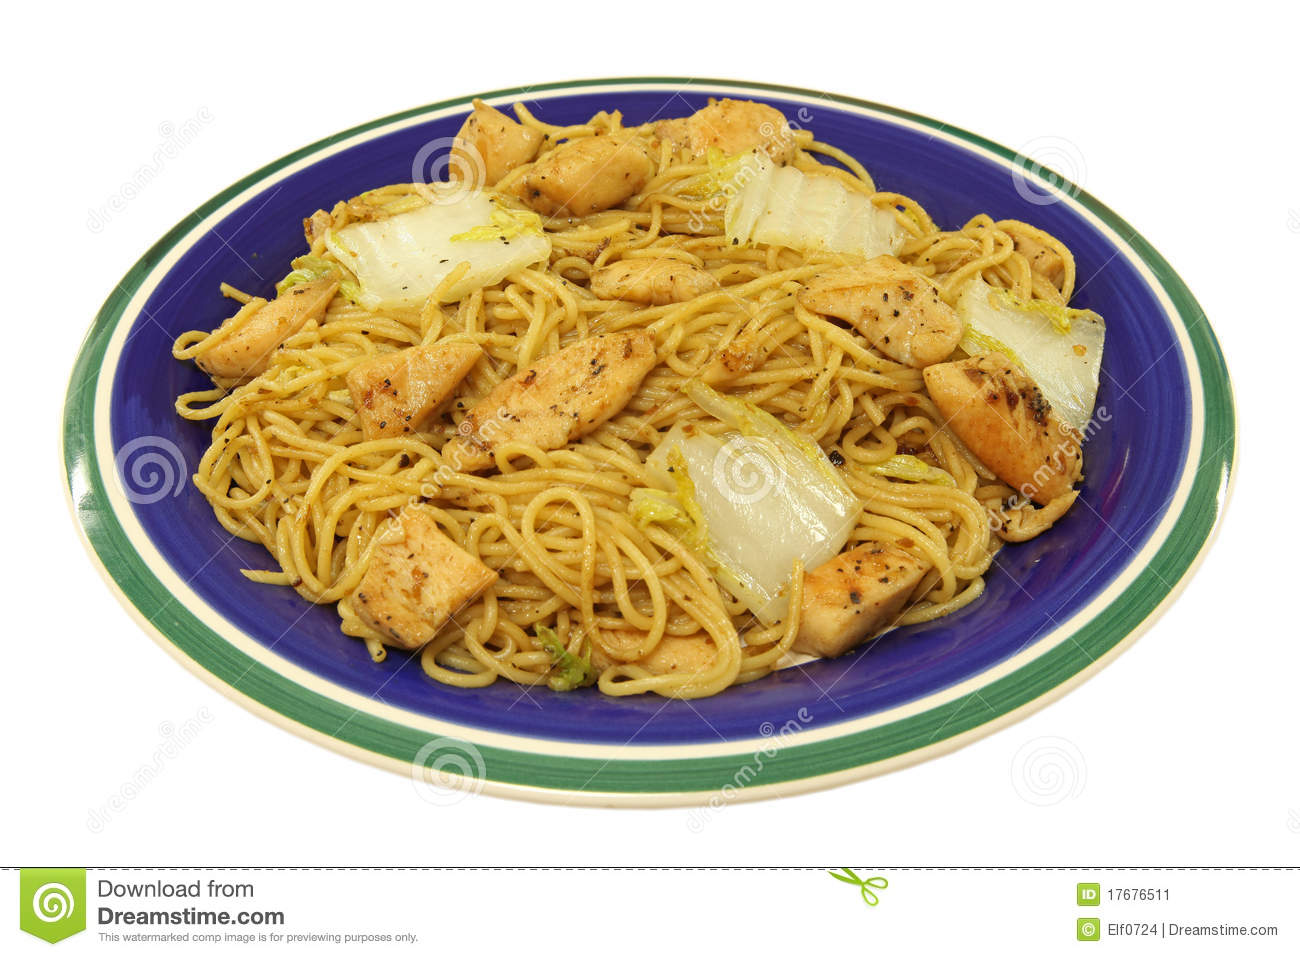 Homemade Meal   Fried Noodles With Chicken   Satay Stock Image   Image    